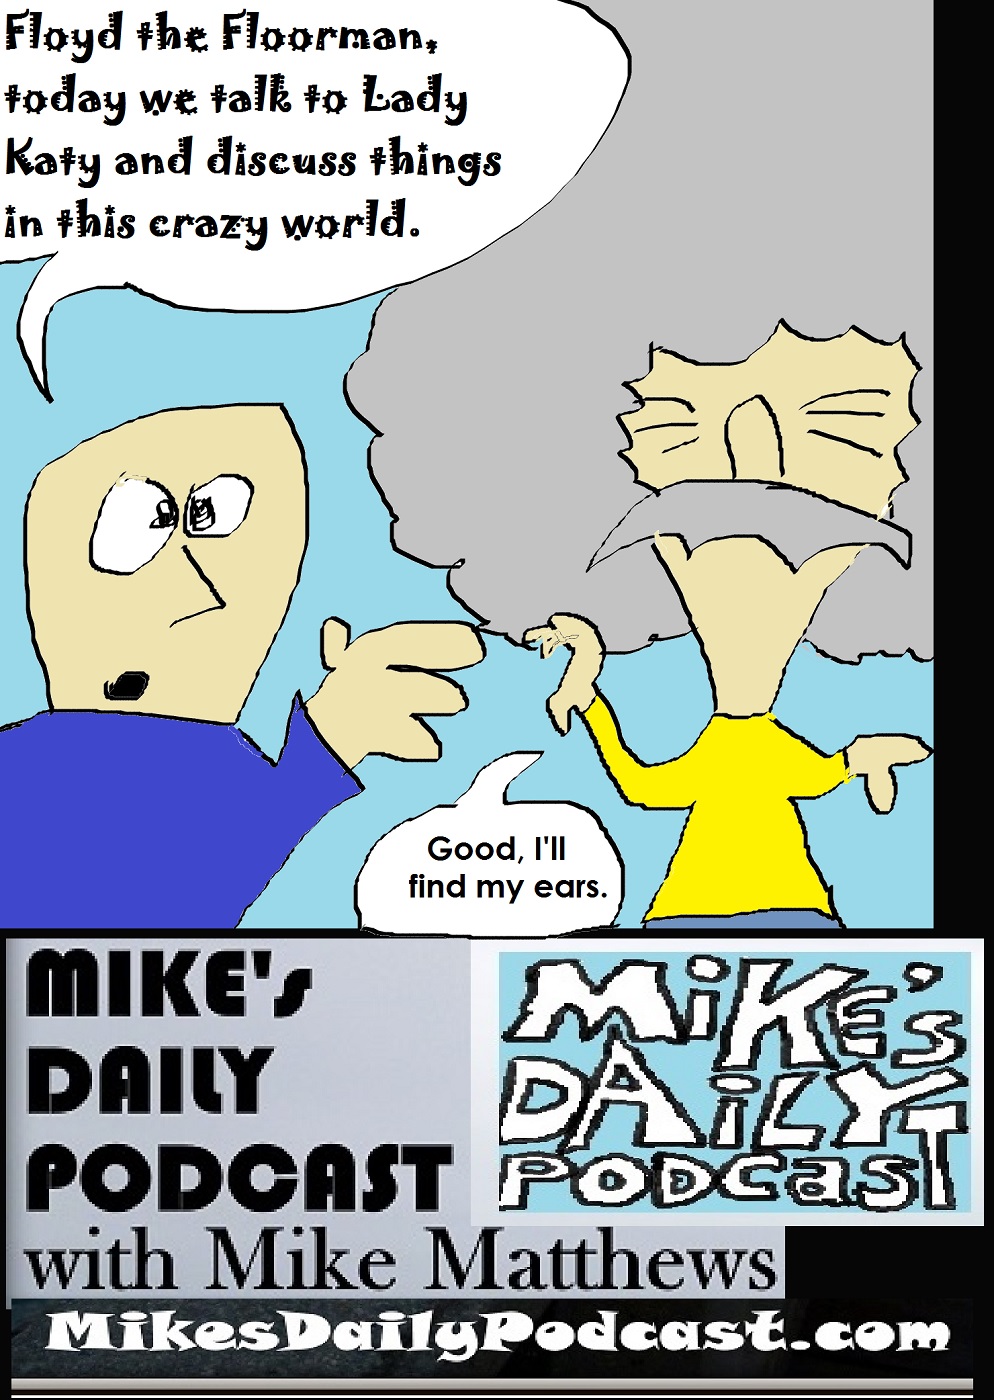 MIKEs DAILY PODCAST 1114 Floyd the Floorman